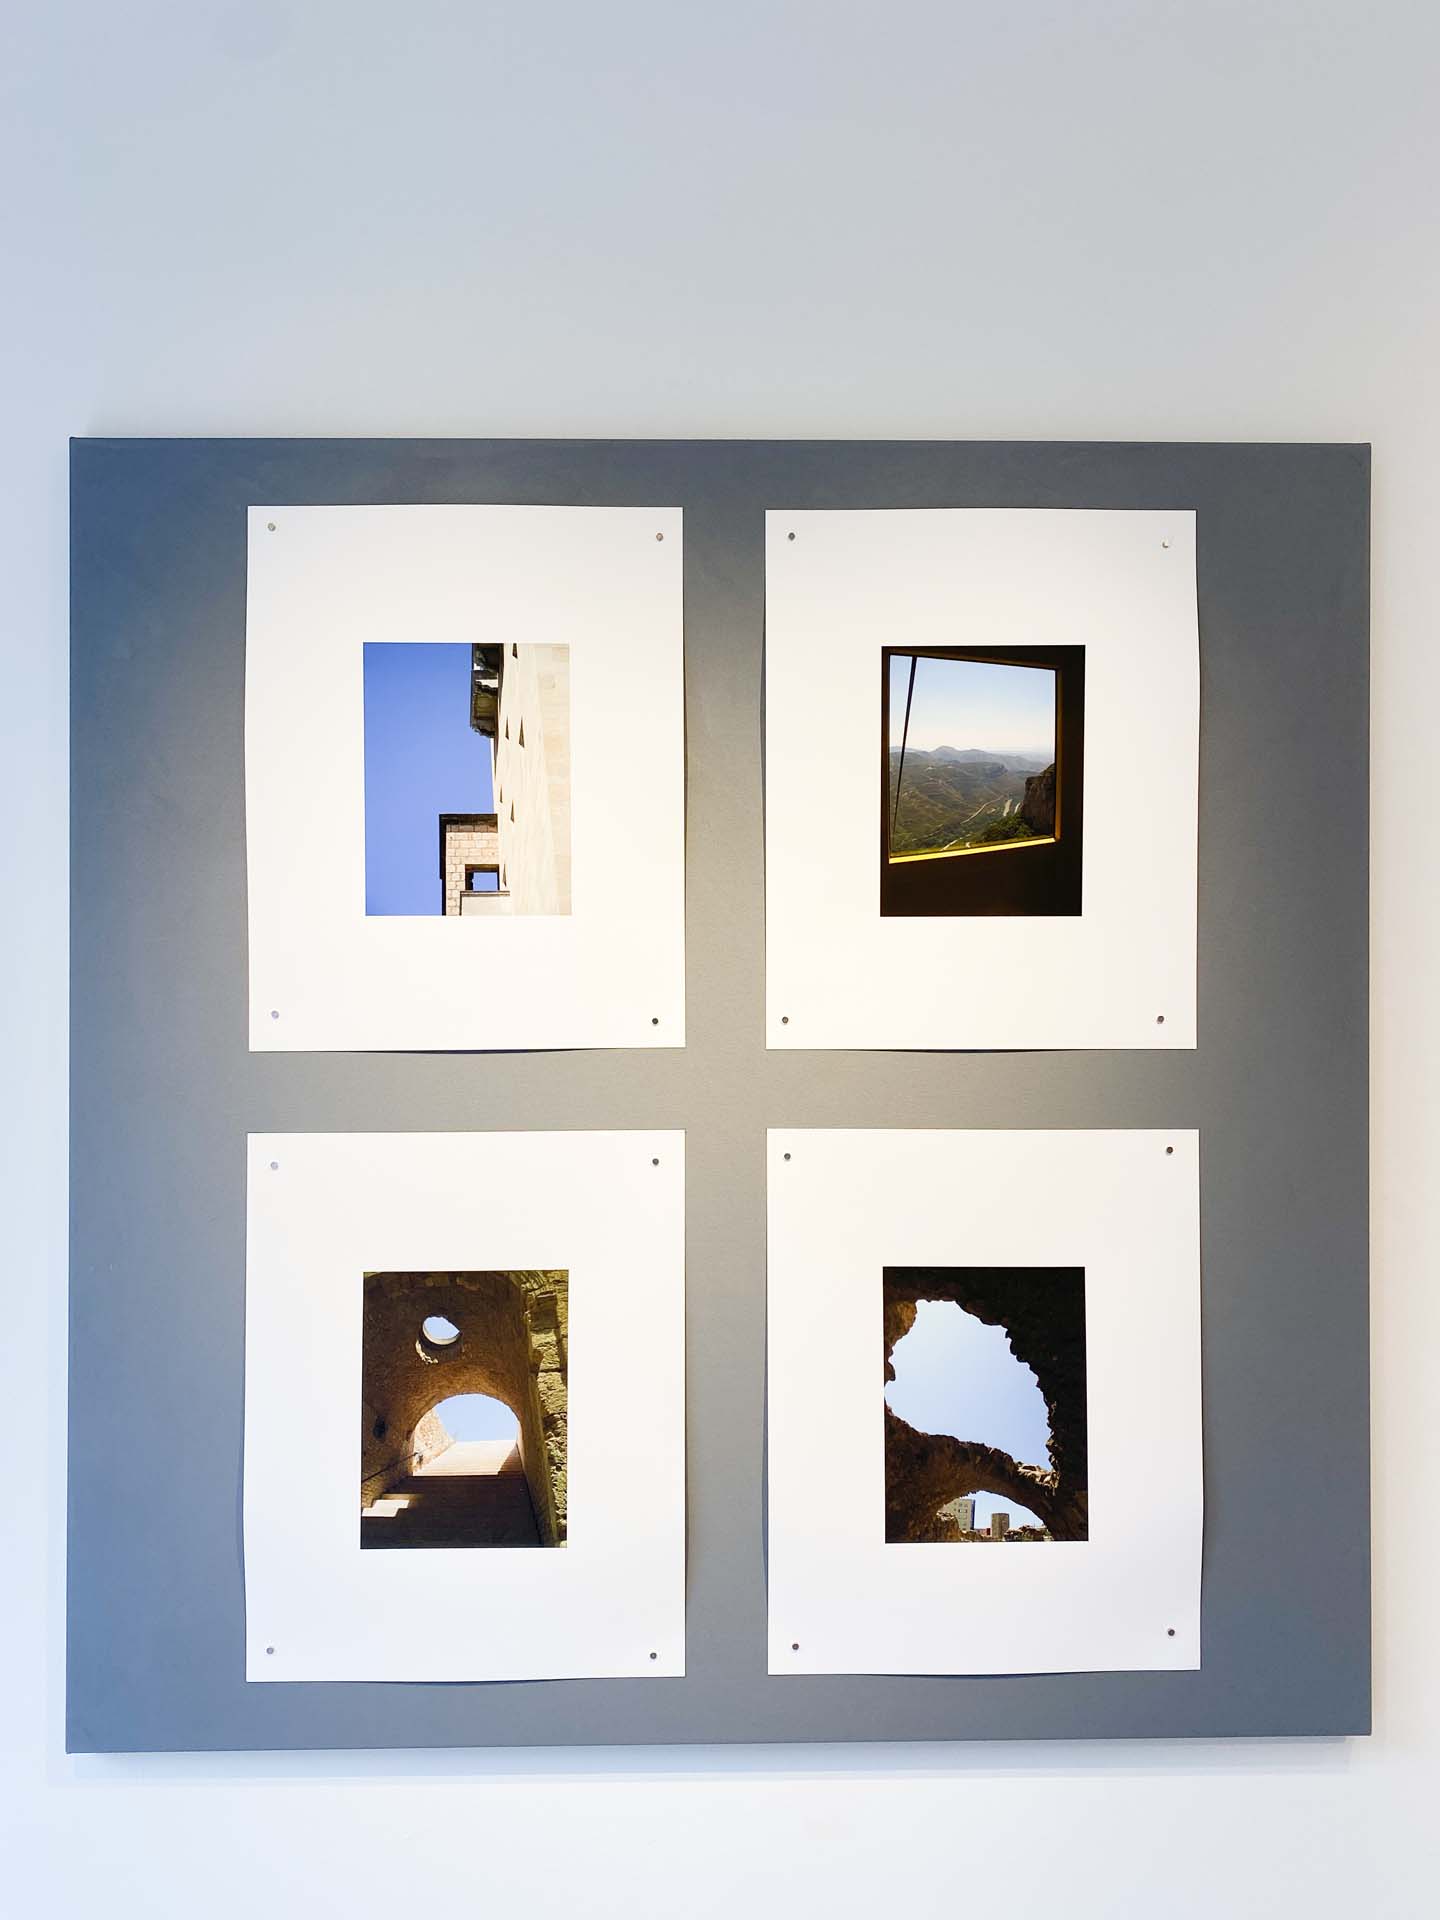 Installation view of Nadine Wyczolkowski: over/looked. Oct 4 to Oct 29, 2022. Centre[3] Members' Gallery.